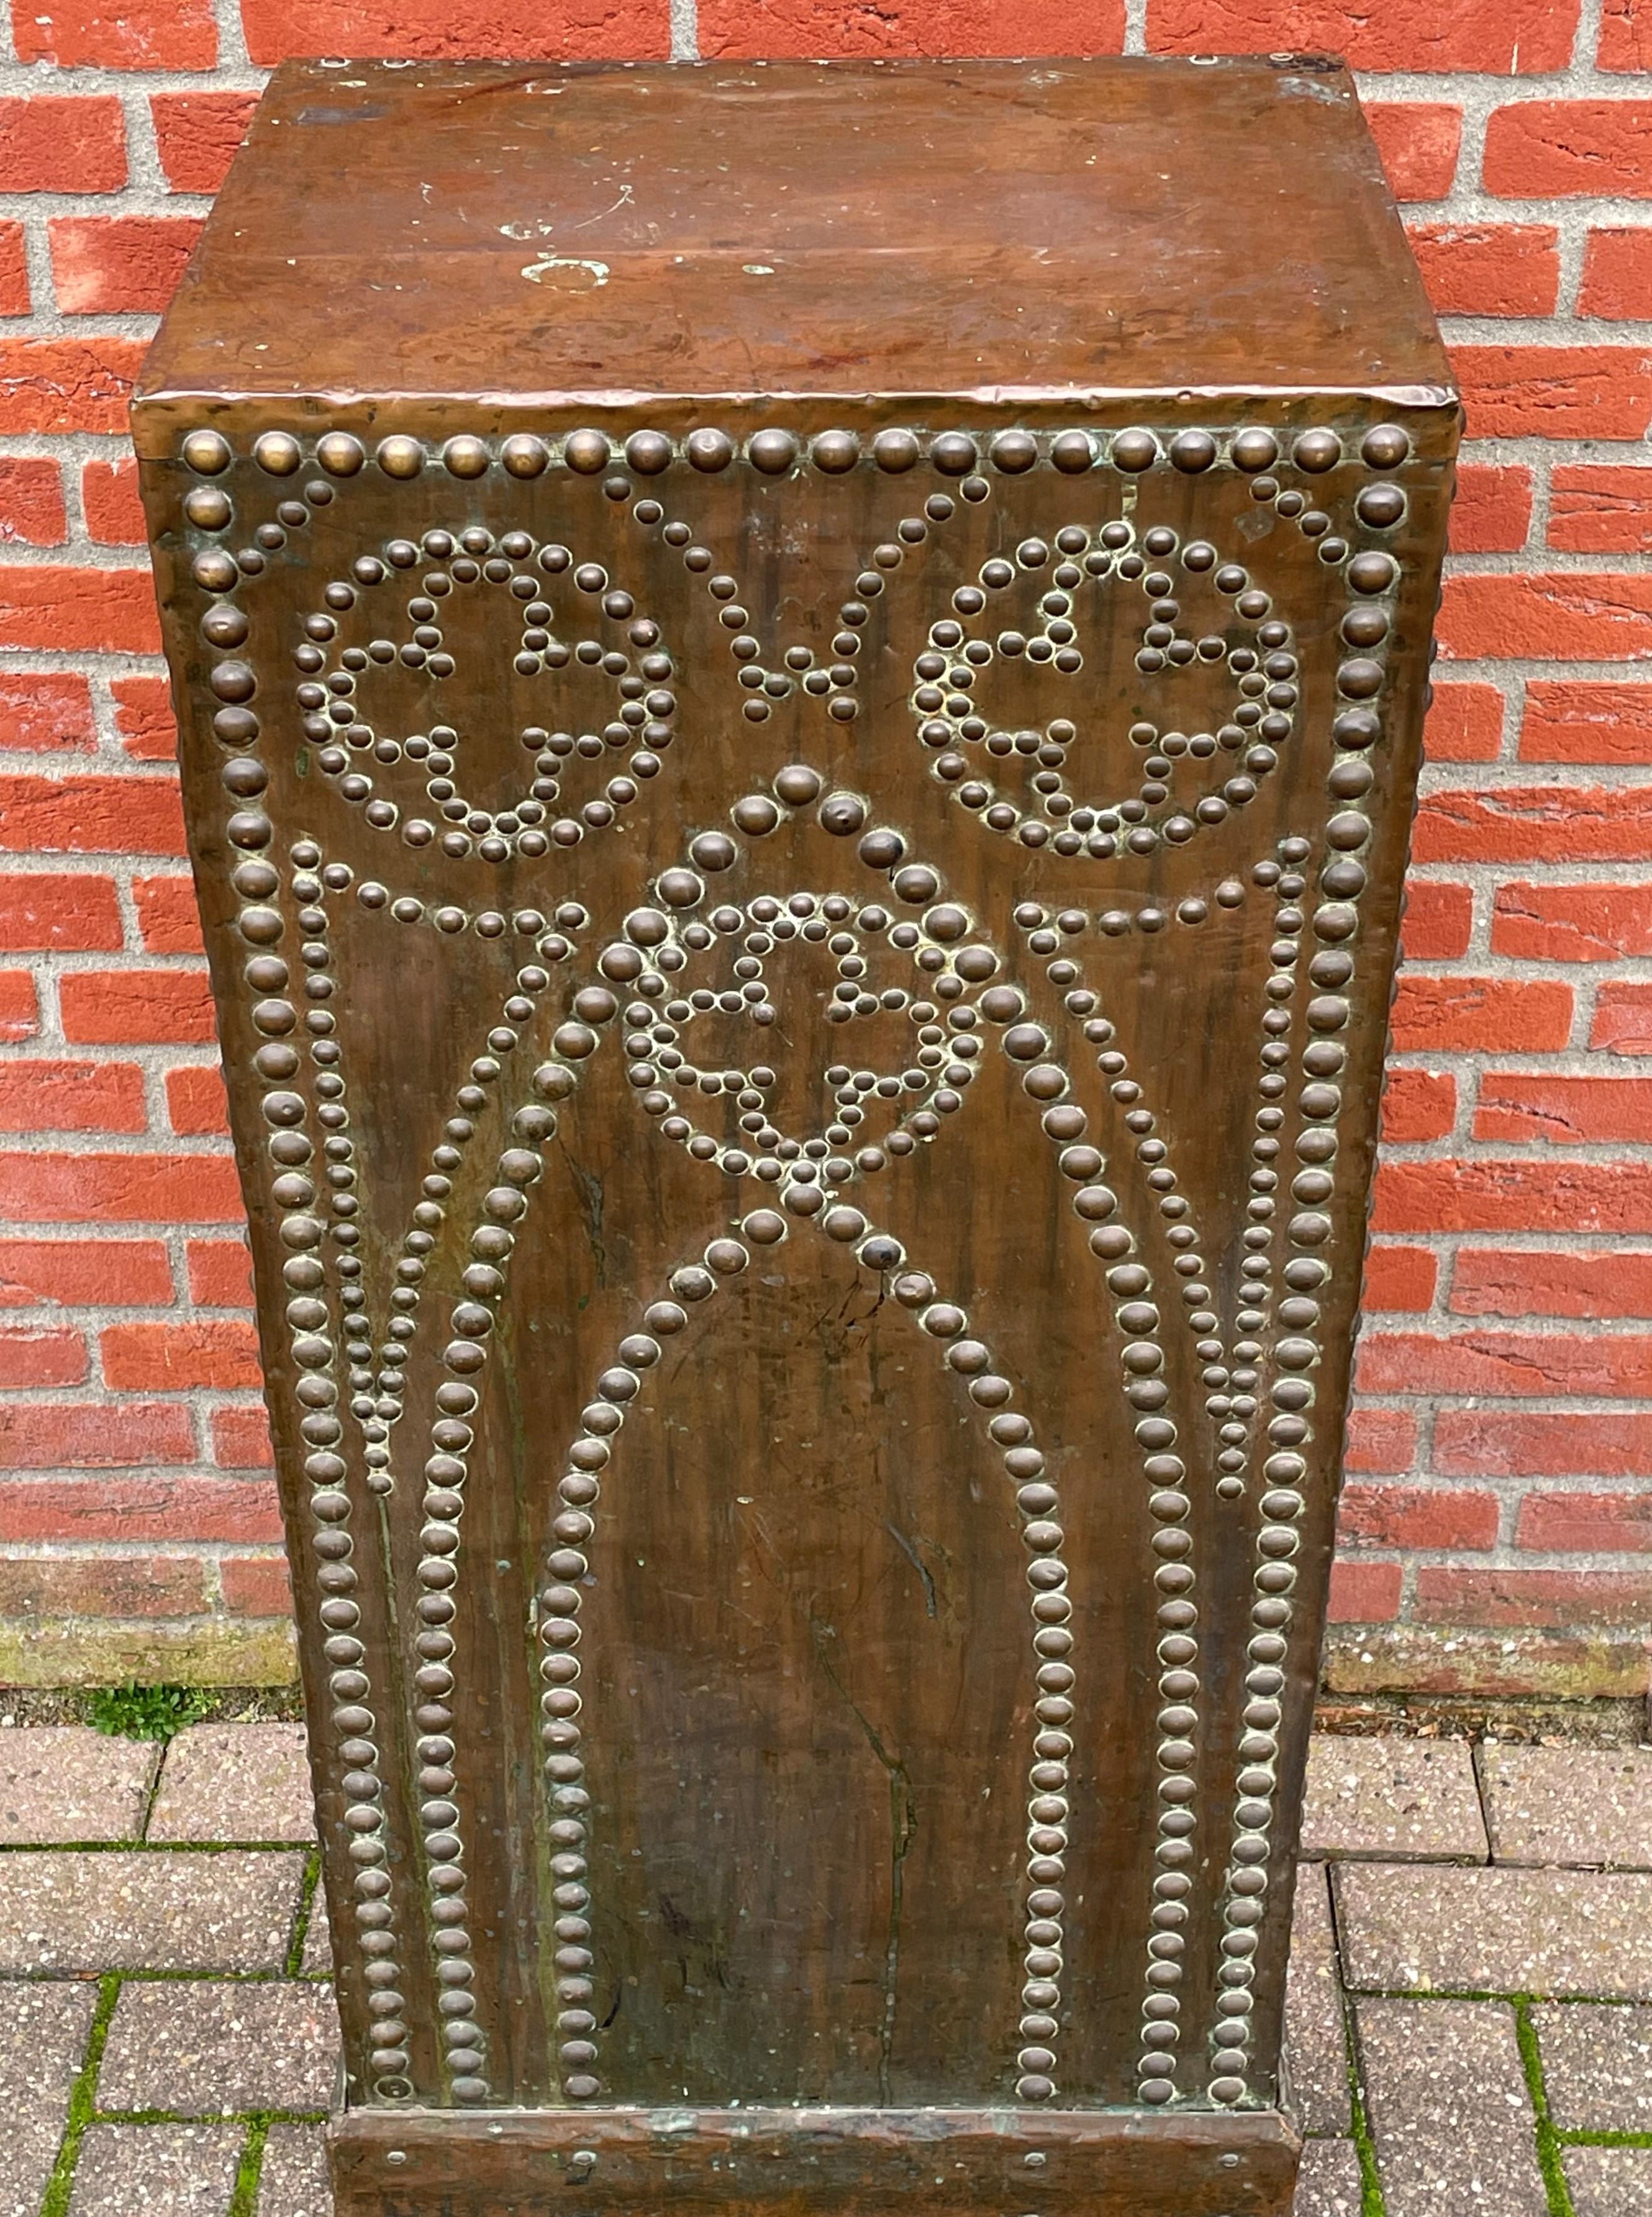 European Antique Handcrafted Gothic Revival Copper on Wood Church Column Pedestal Stand For Sale